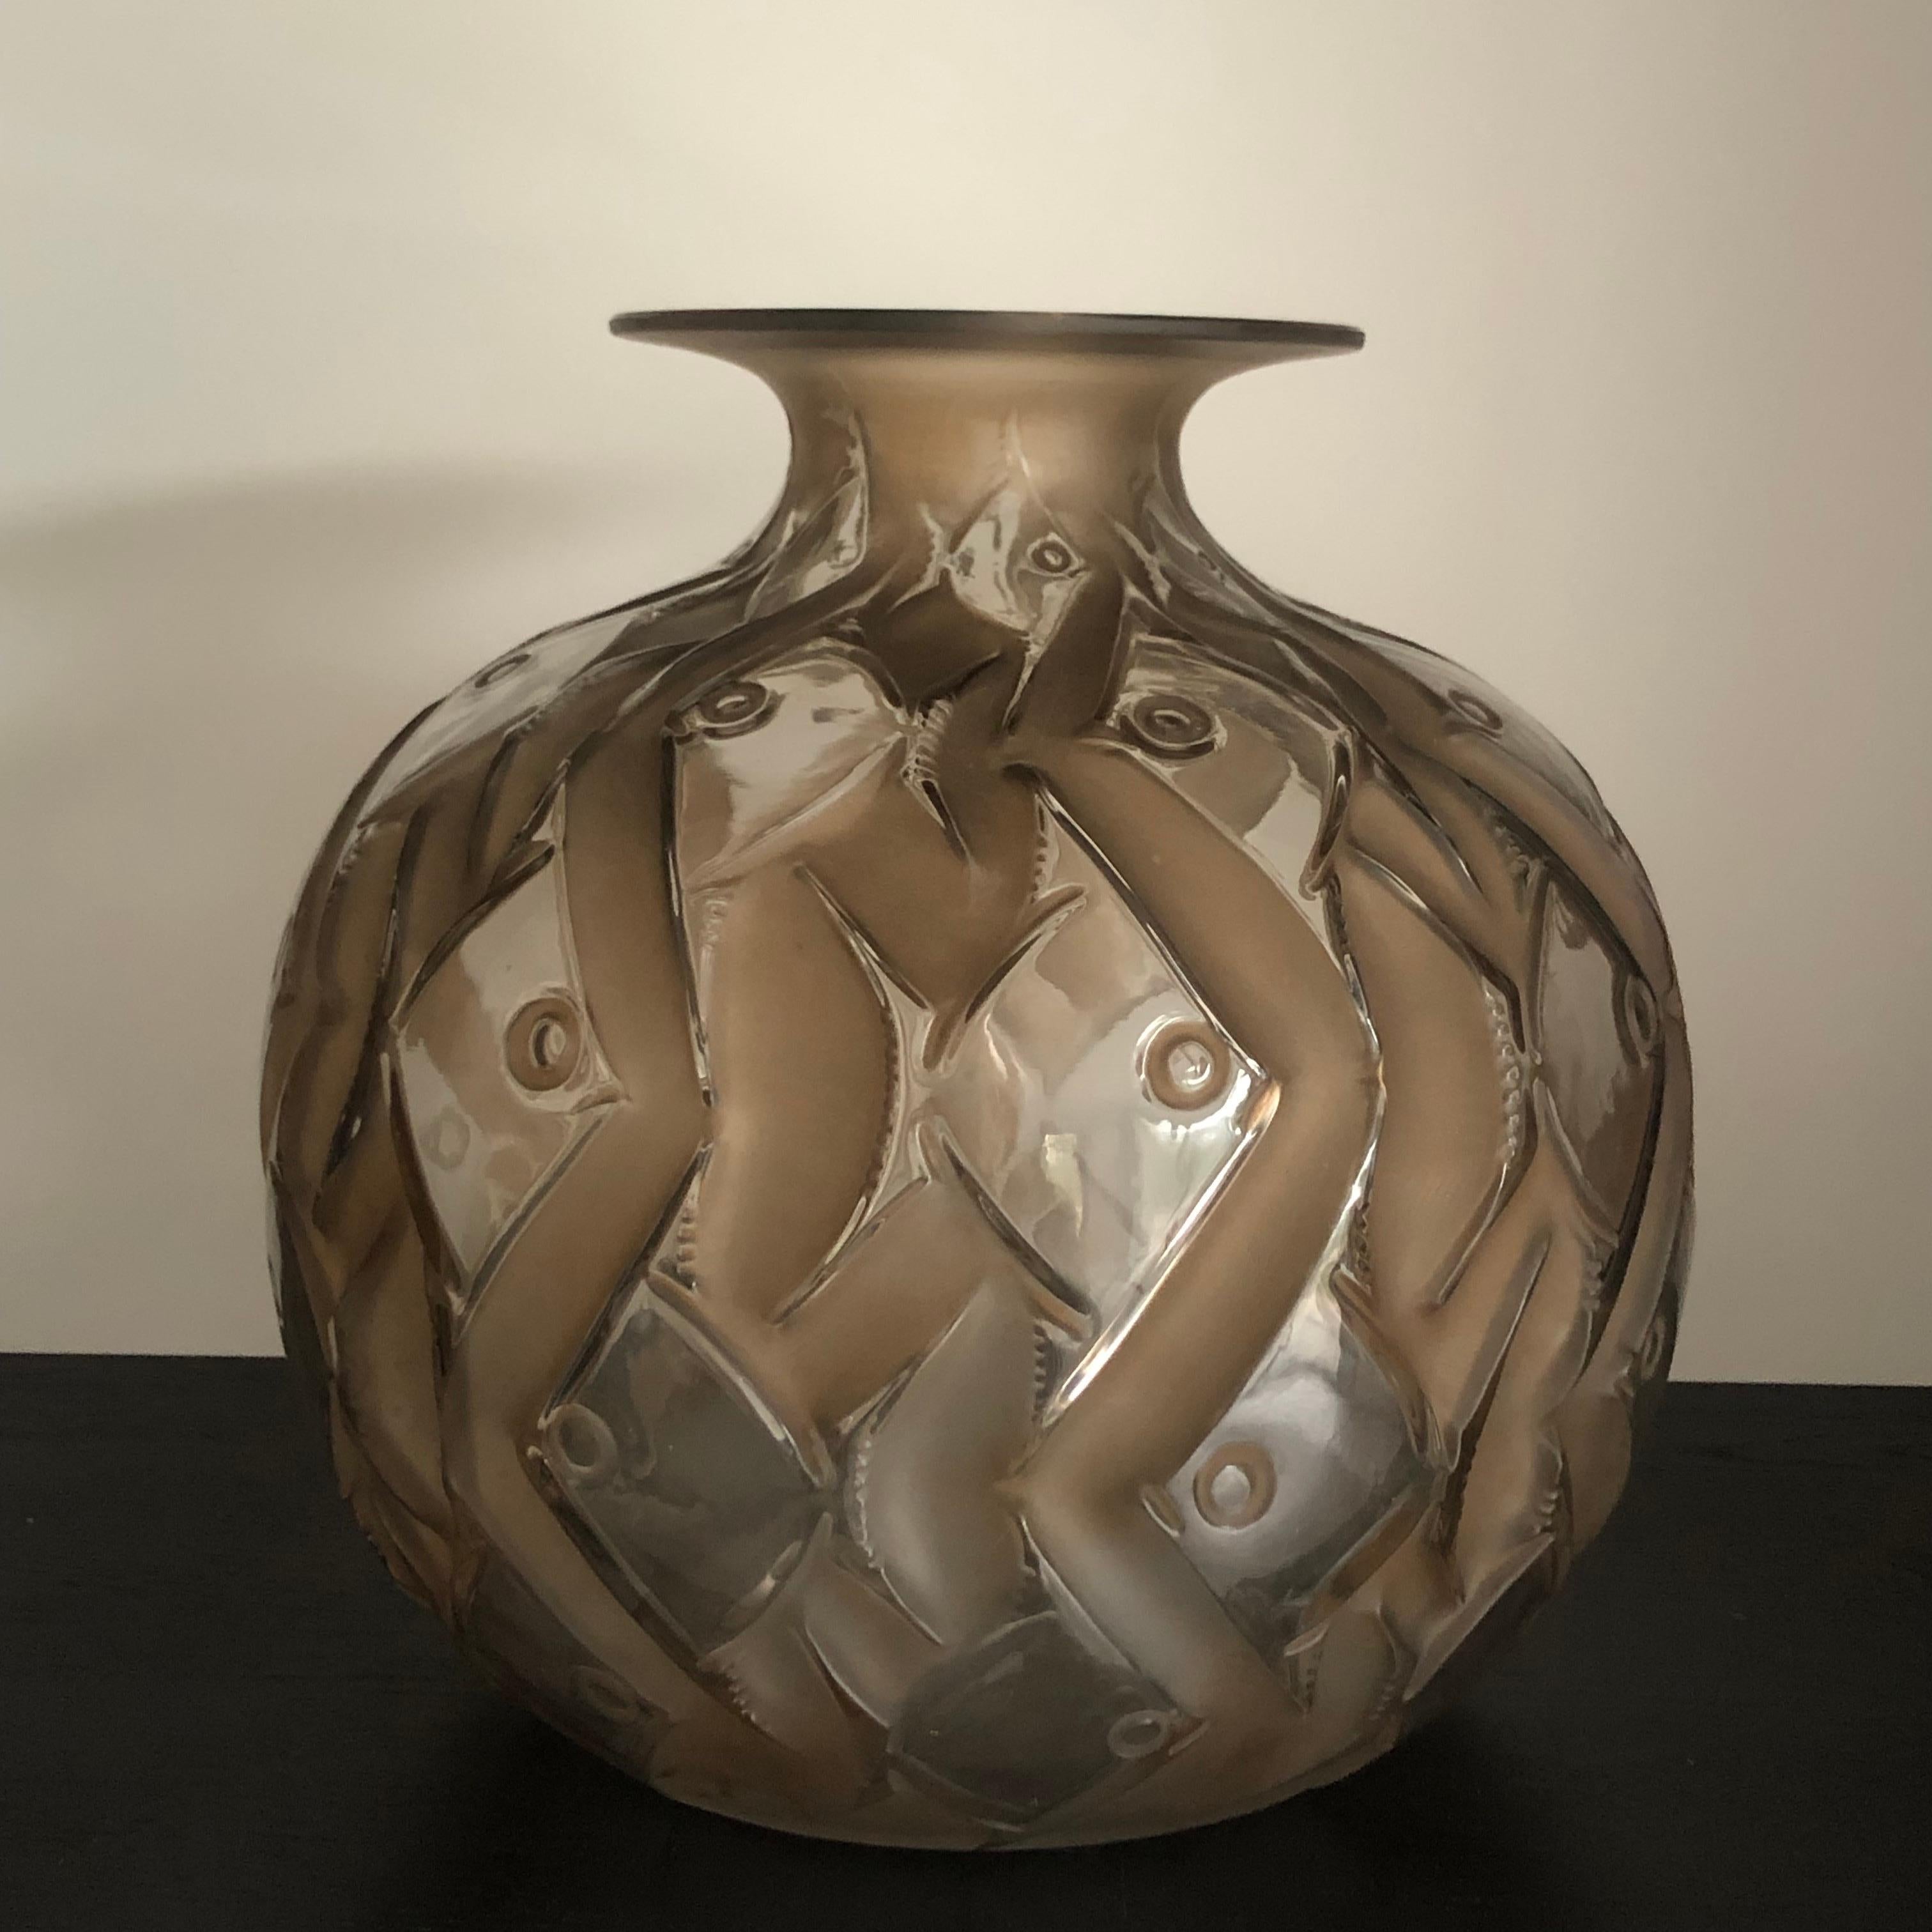 Molded 1928 René Lalique Penthievre Vase in Clear Glass with Sepia Patina Fishes